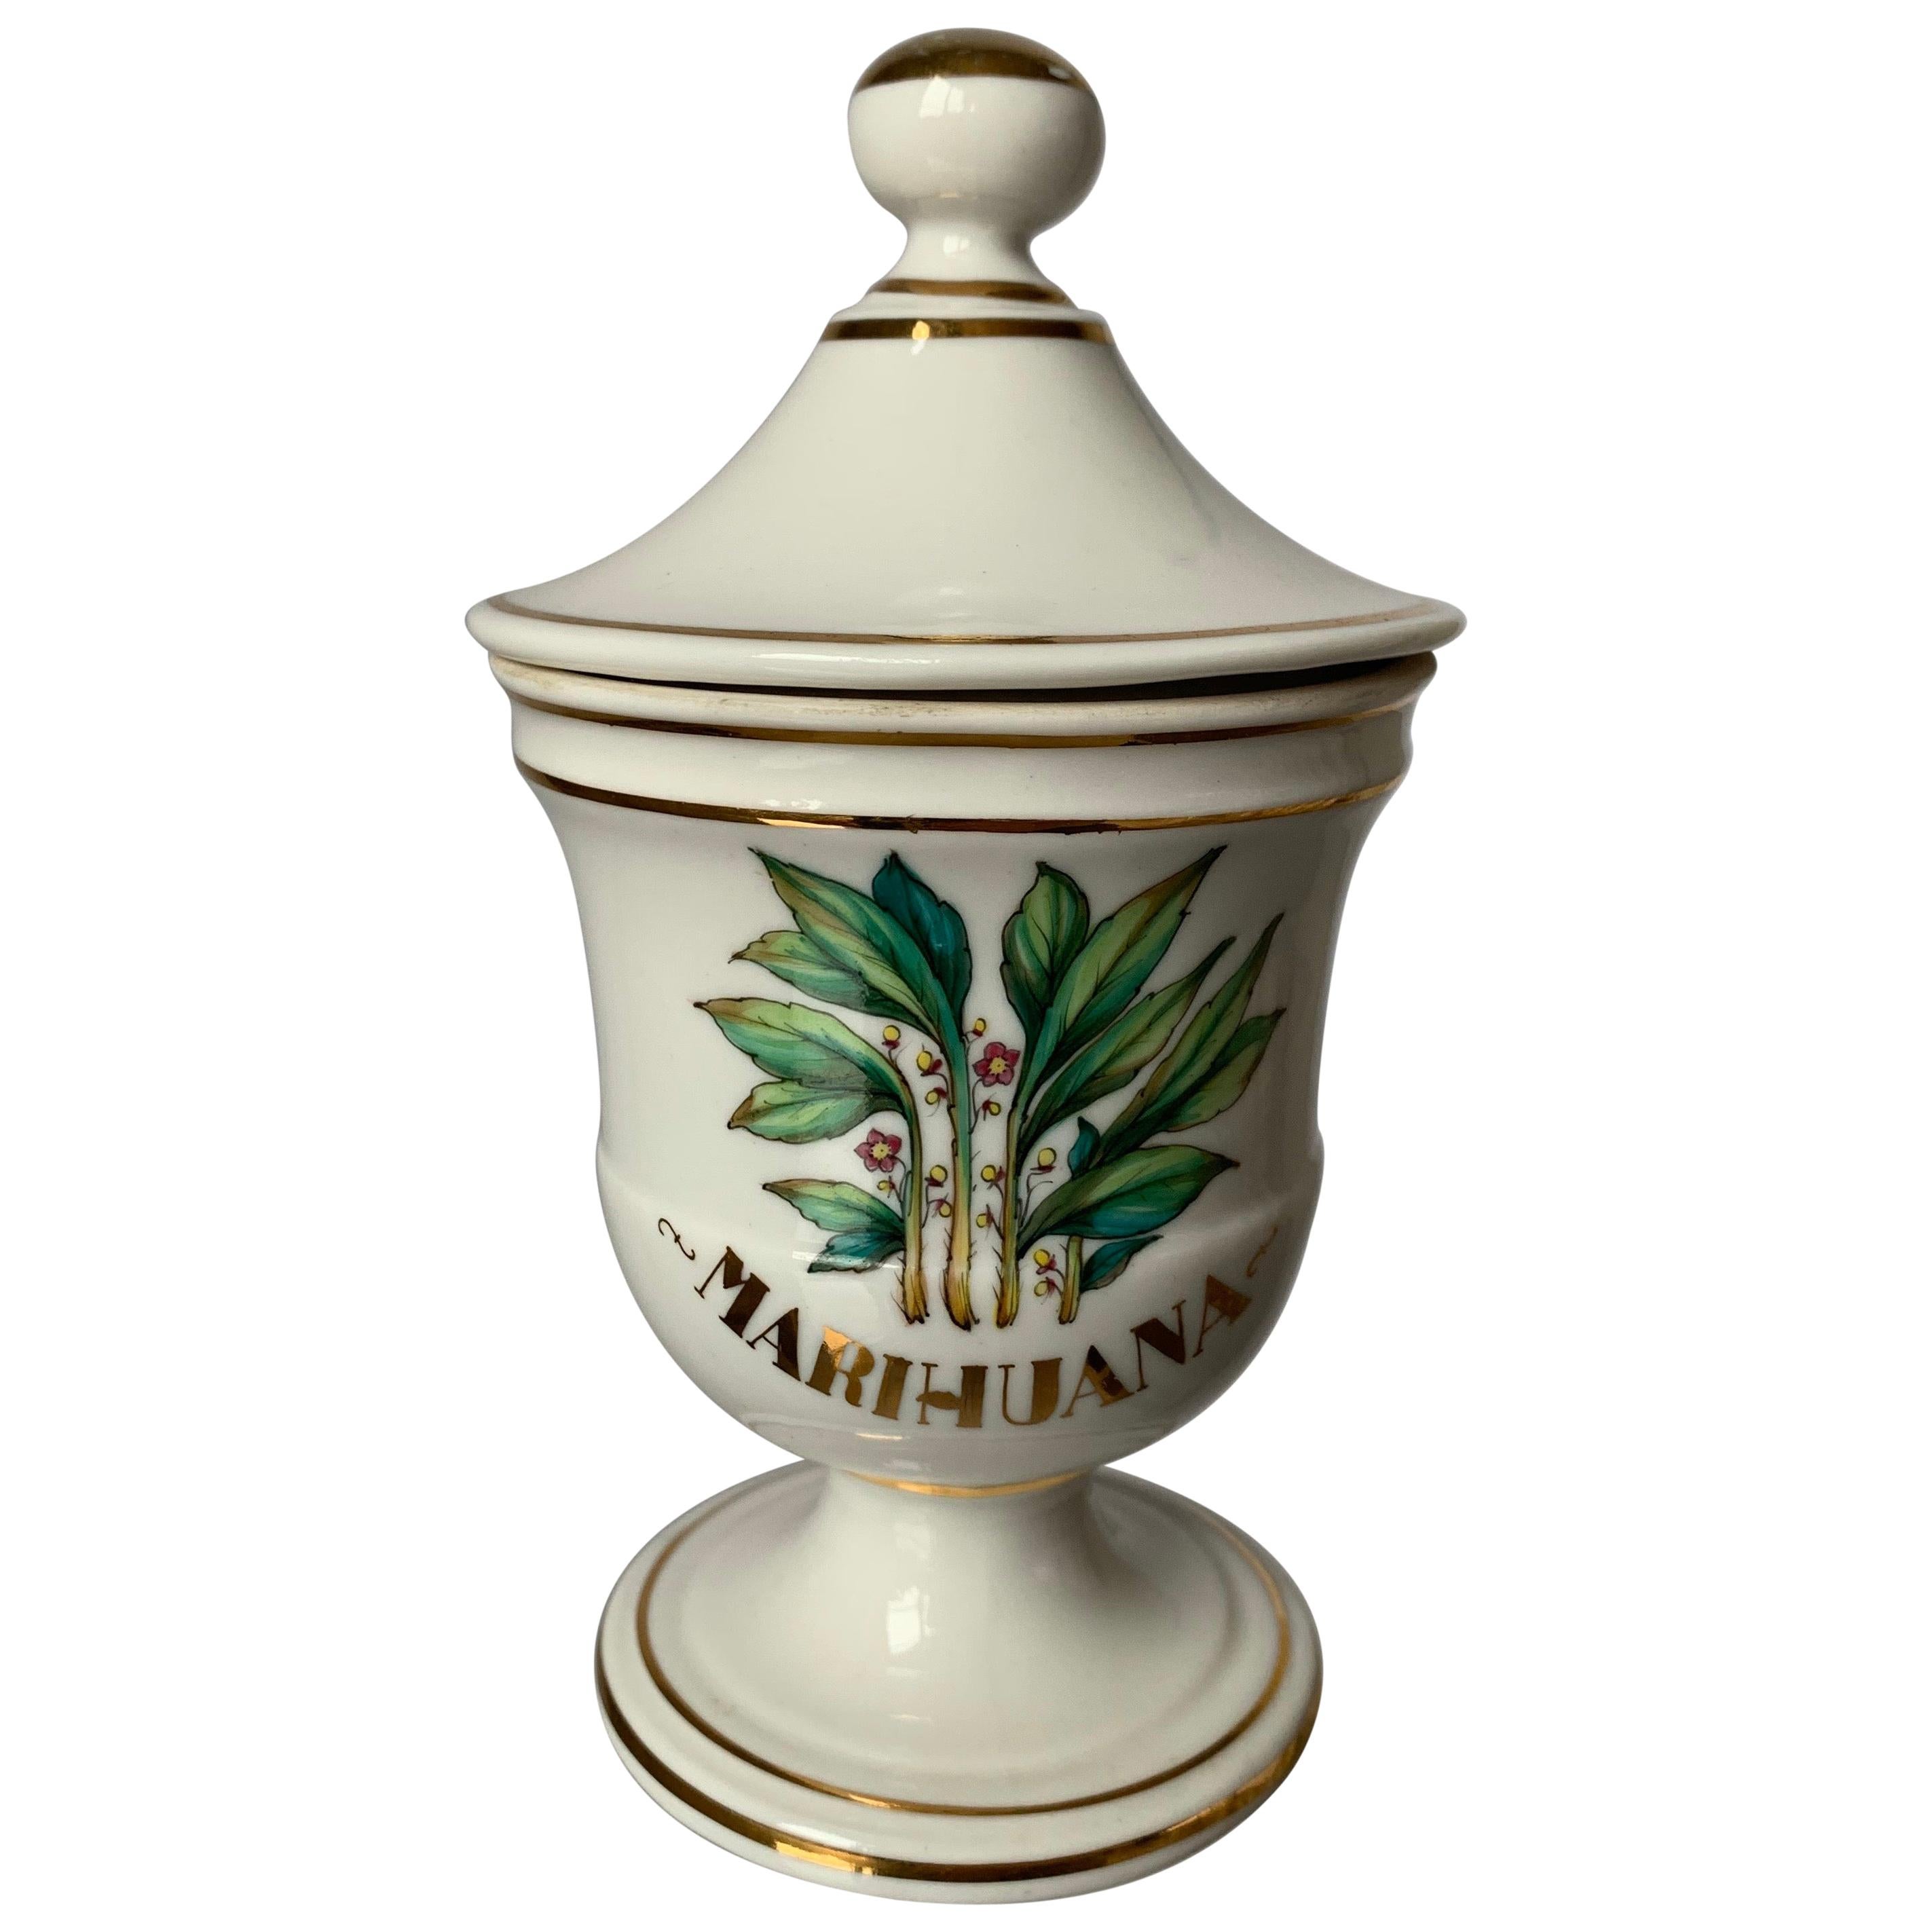 Limoges Marihuana Gold Rimmed Apothecary Jar